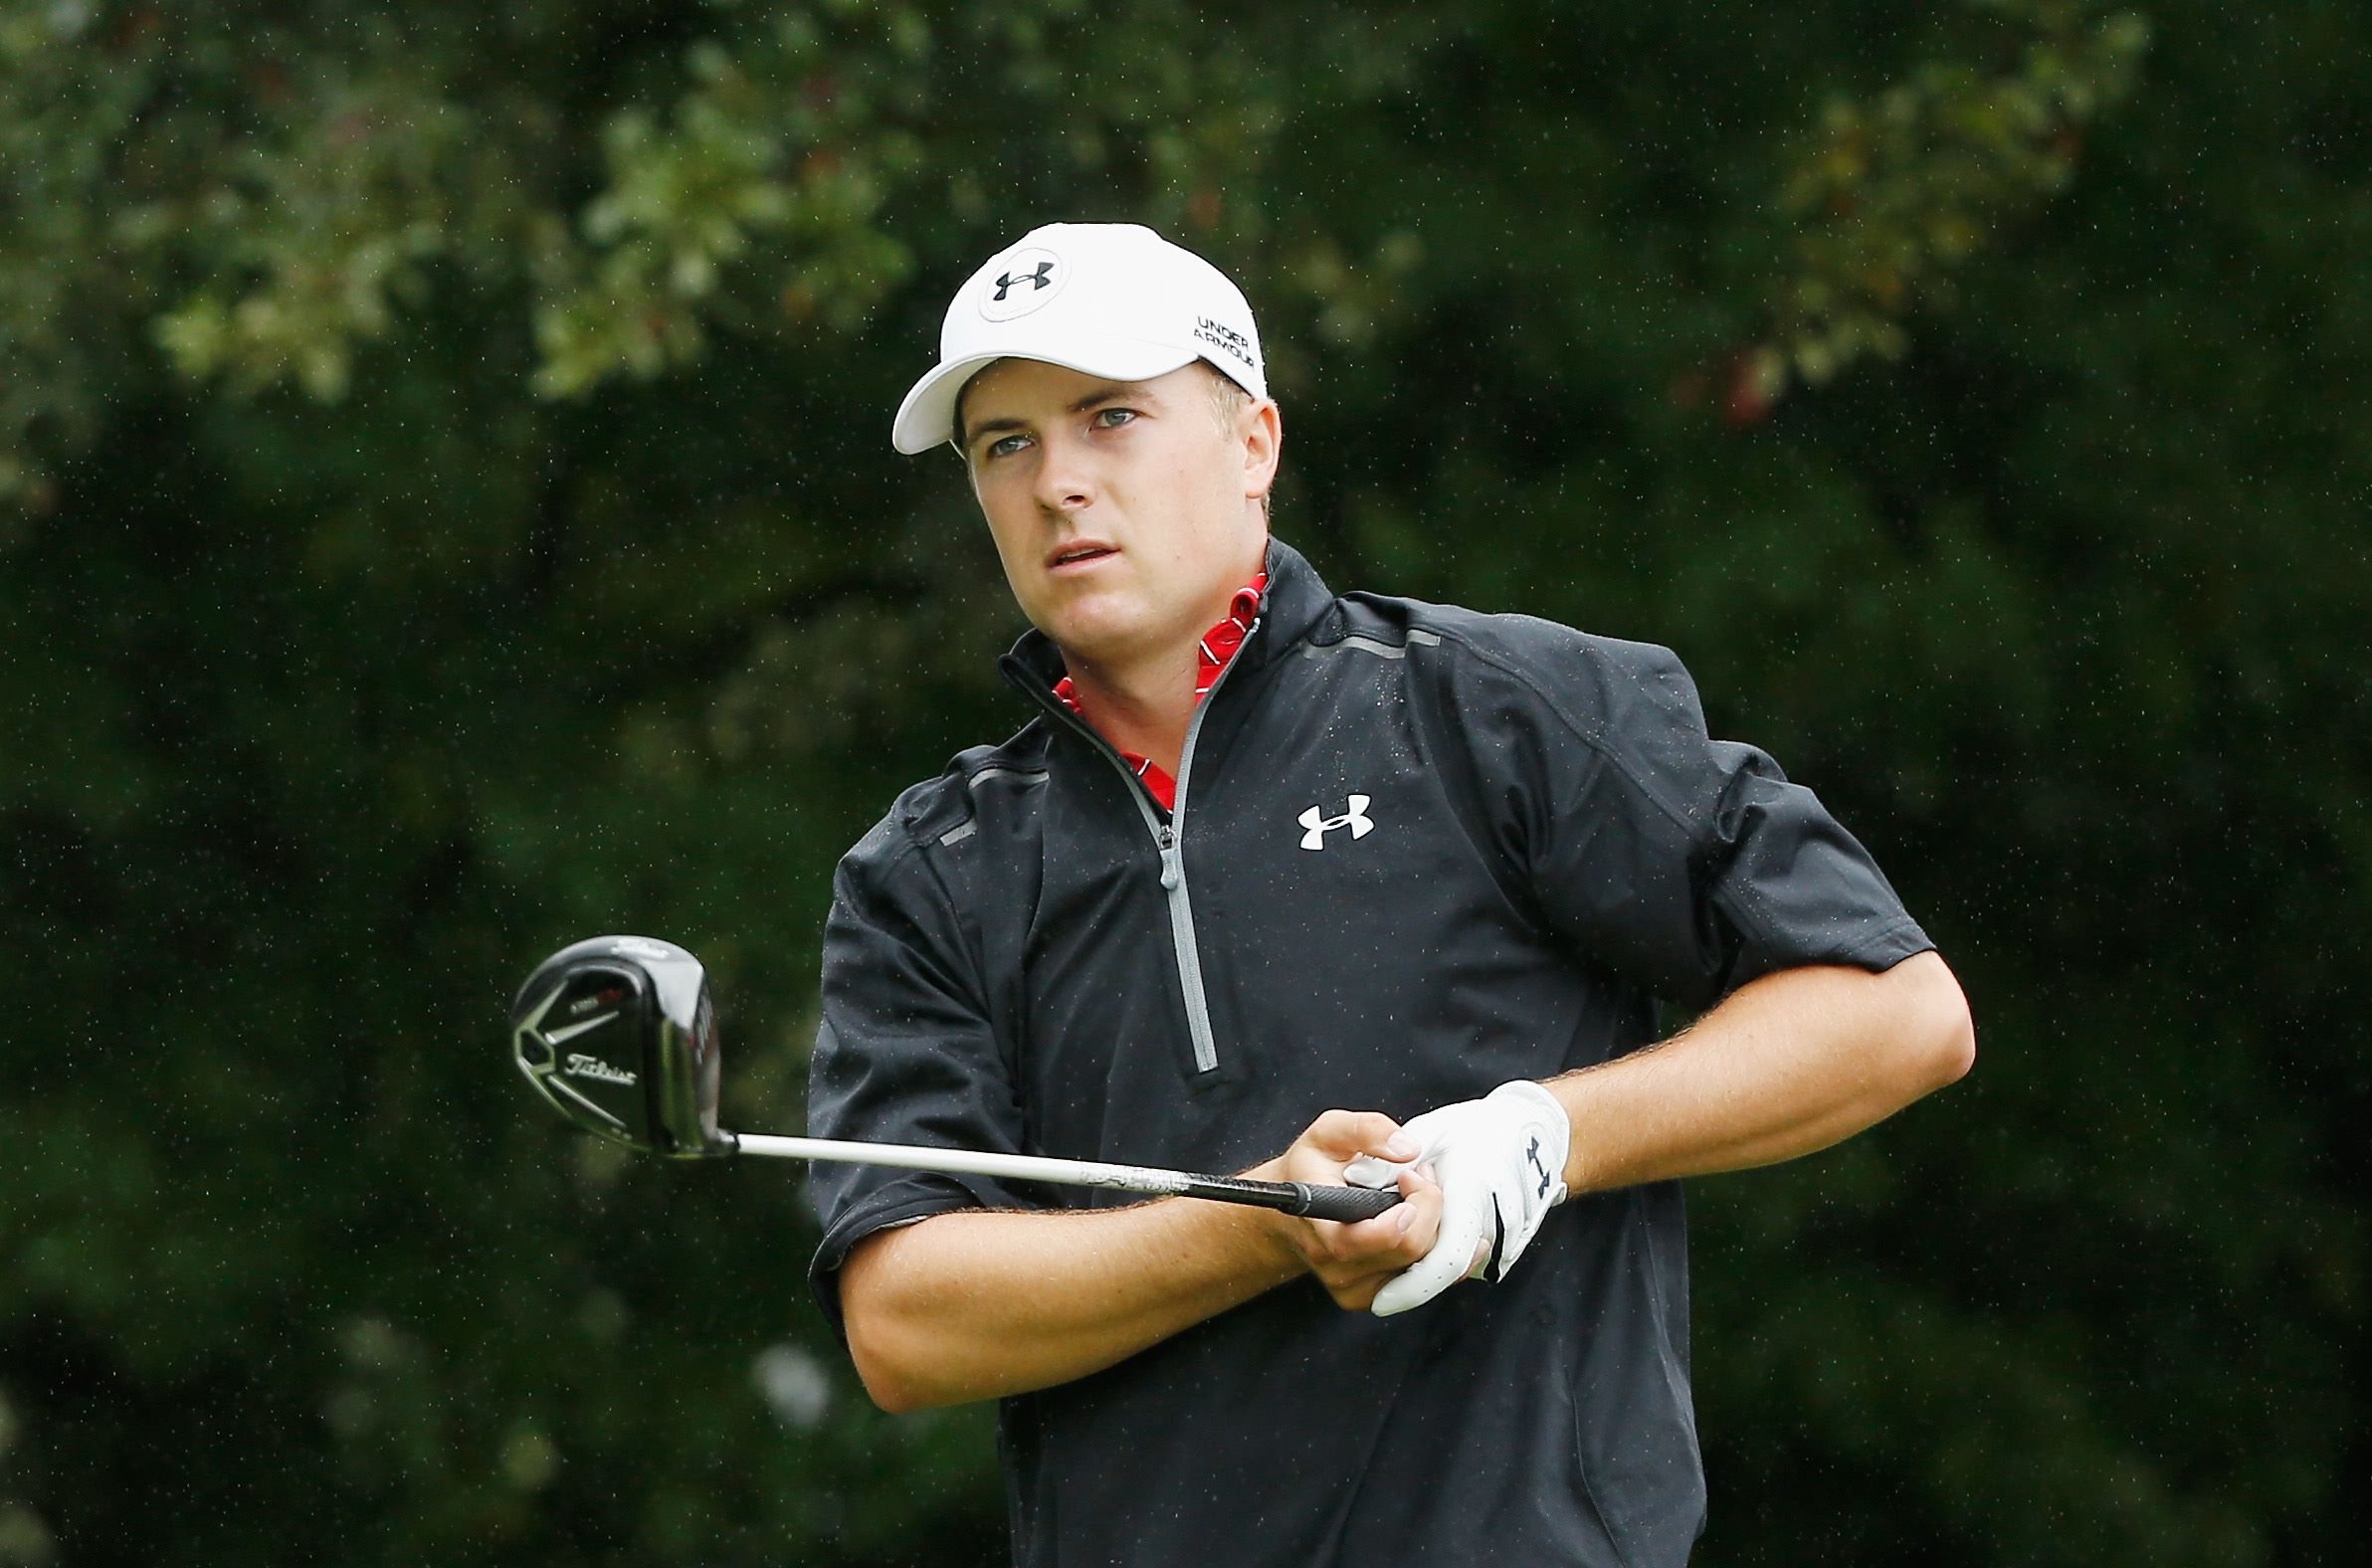 Jordan Spieth of the United States watches his tee shot on the third hole during the third round of the TOUR Championship By Coca-Cola at East Lake Golf Club on September 26, 2015 in Atlanta, Georgia. Photo: AFP